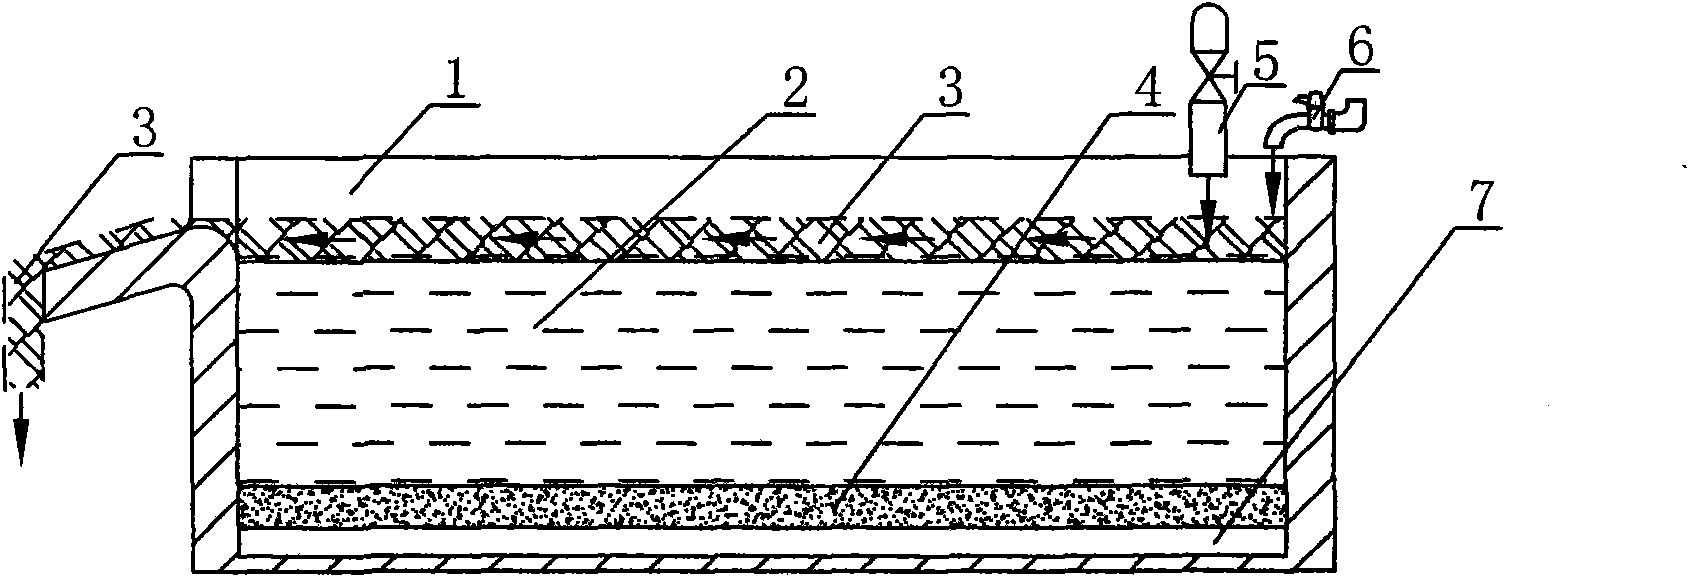 Method for selecting asbestos from asbestos-like minerals by wet process by using ultrasonic waves